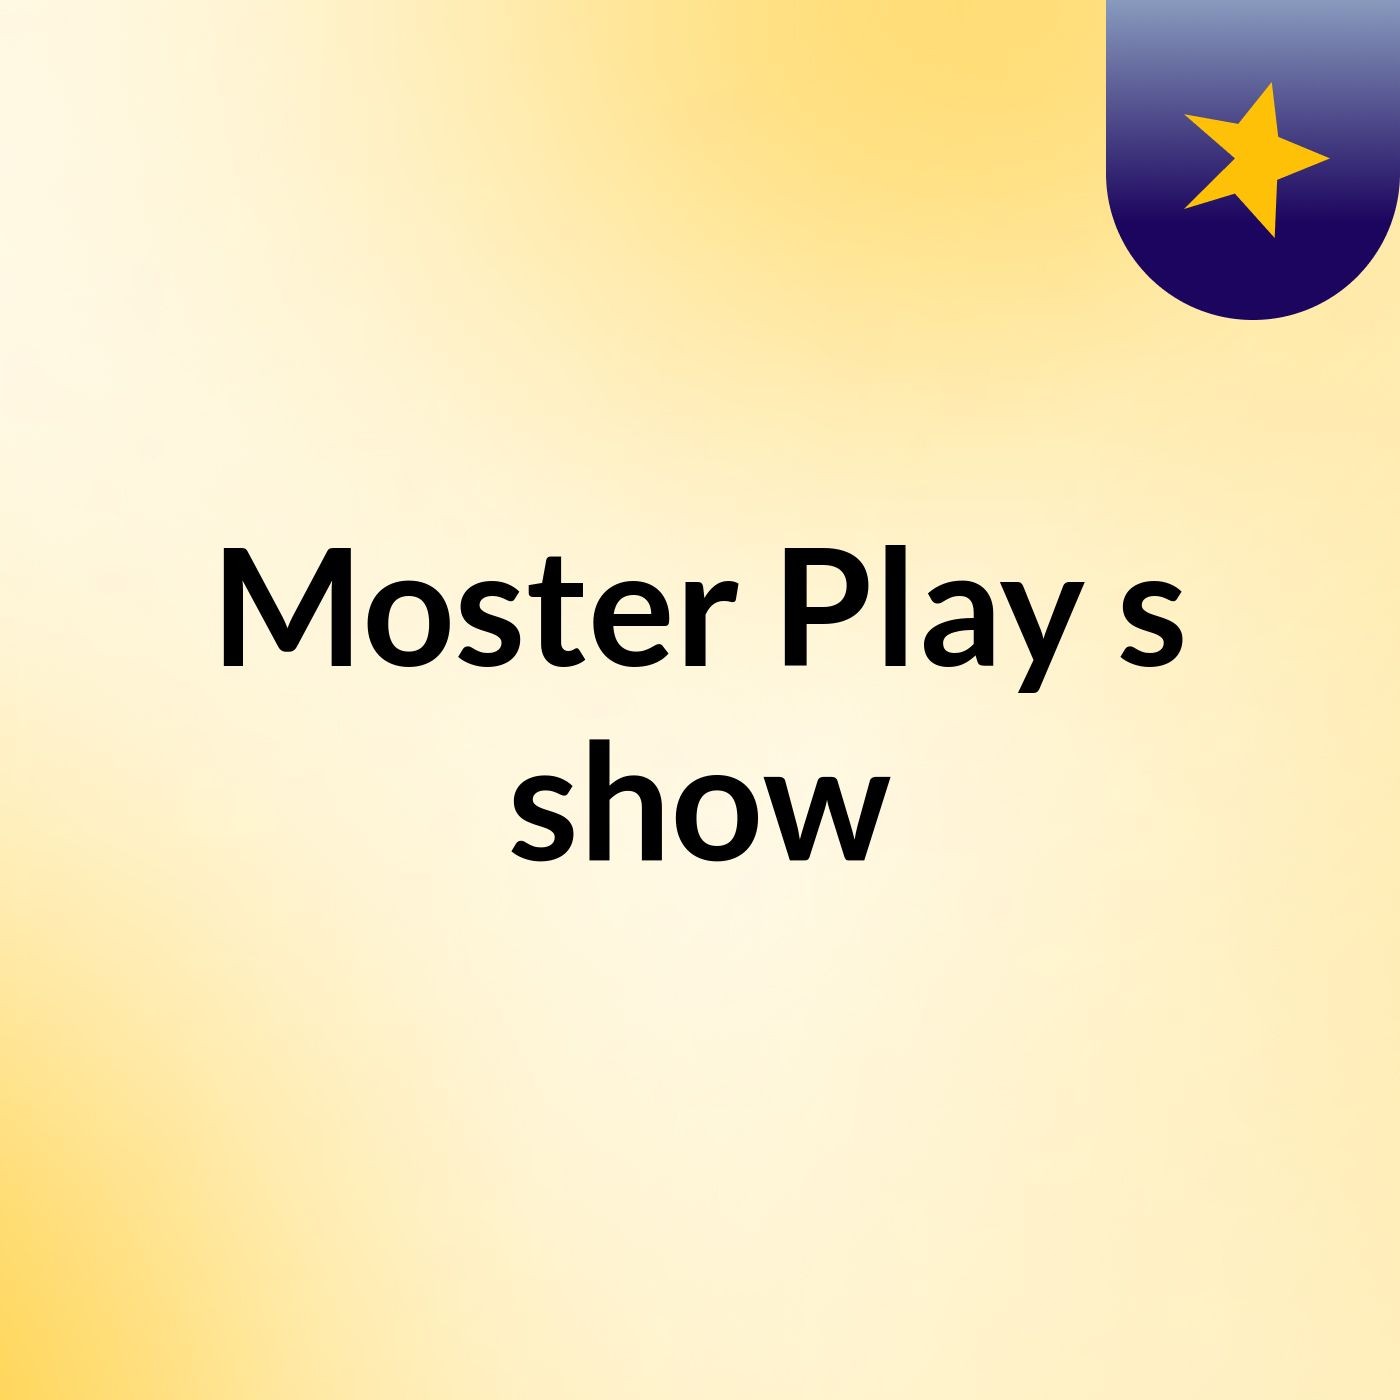 Moster Play's show